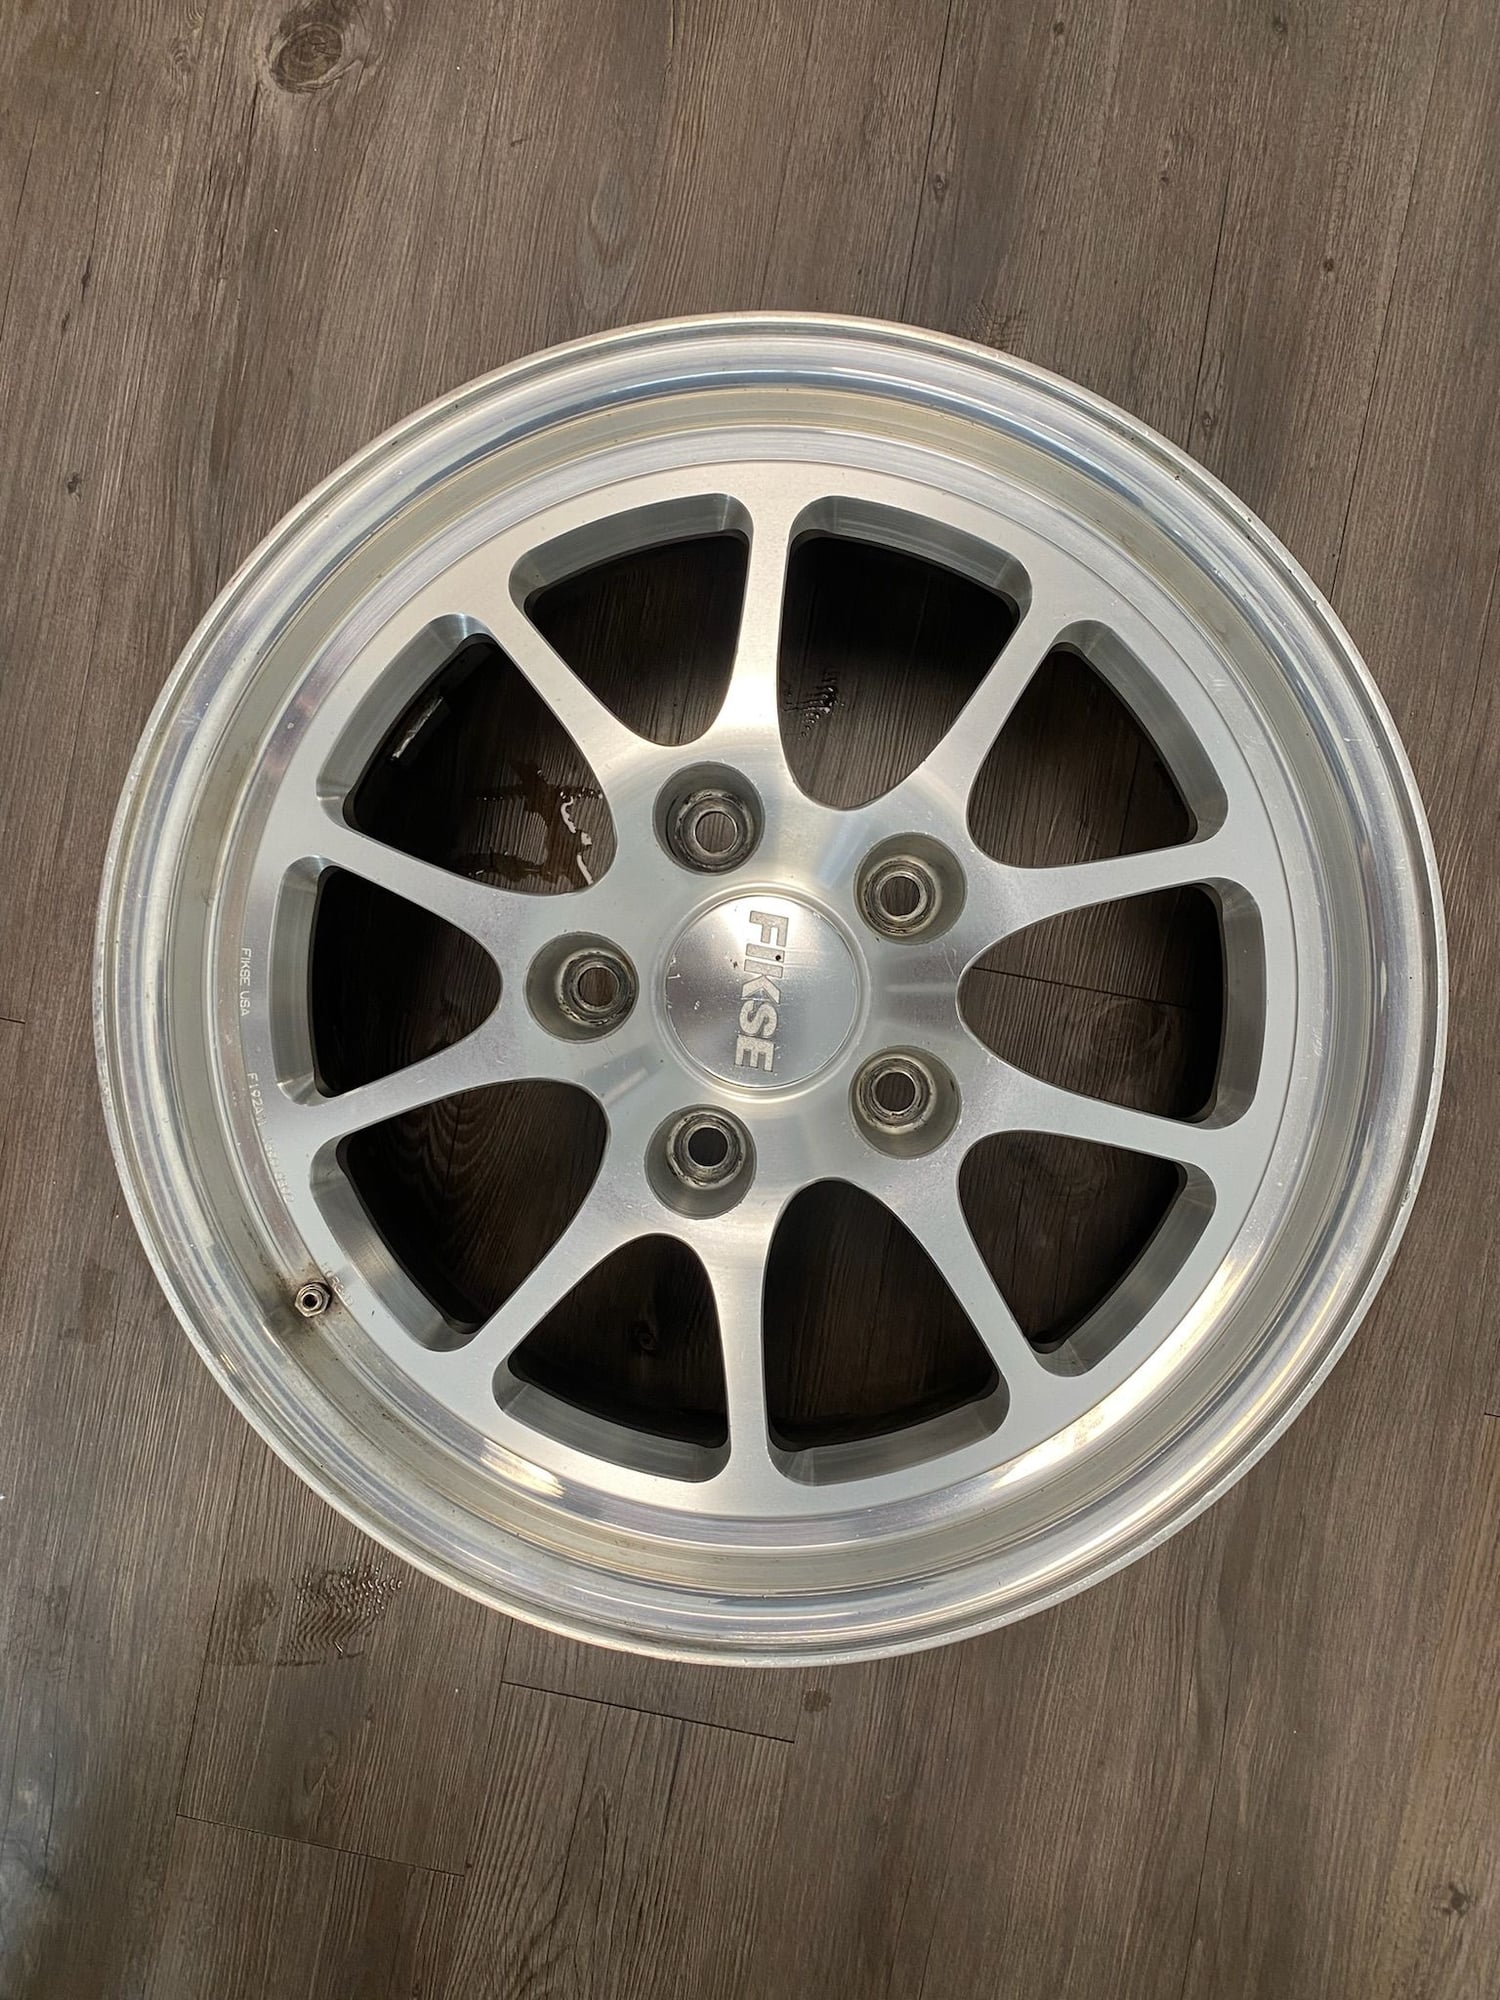 Wheels and Tires/Axles - Fikse Mach-V Forged 17" Wheels set of 4 8.5" Front/10.5" Rear - Used - 0  All Models - Dallas, TX 75231, United States